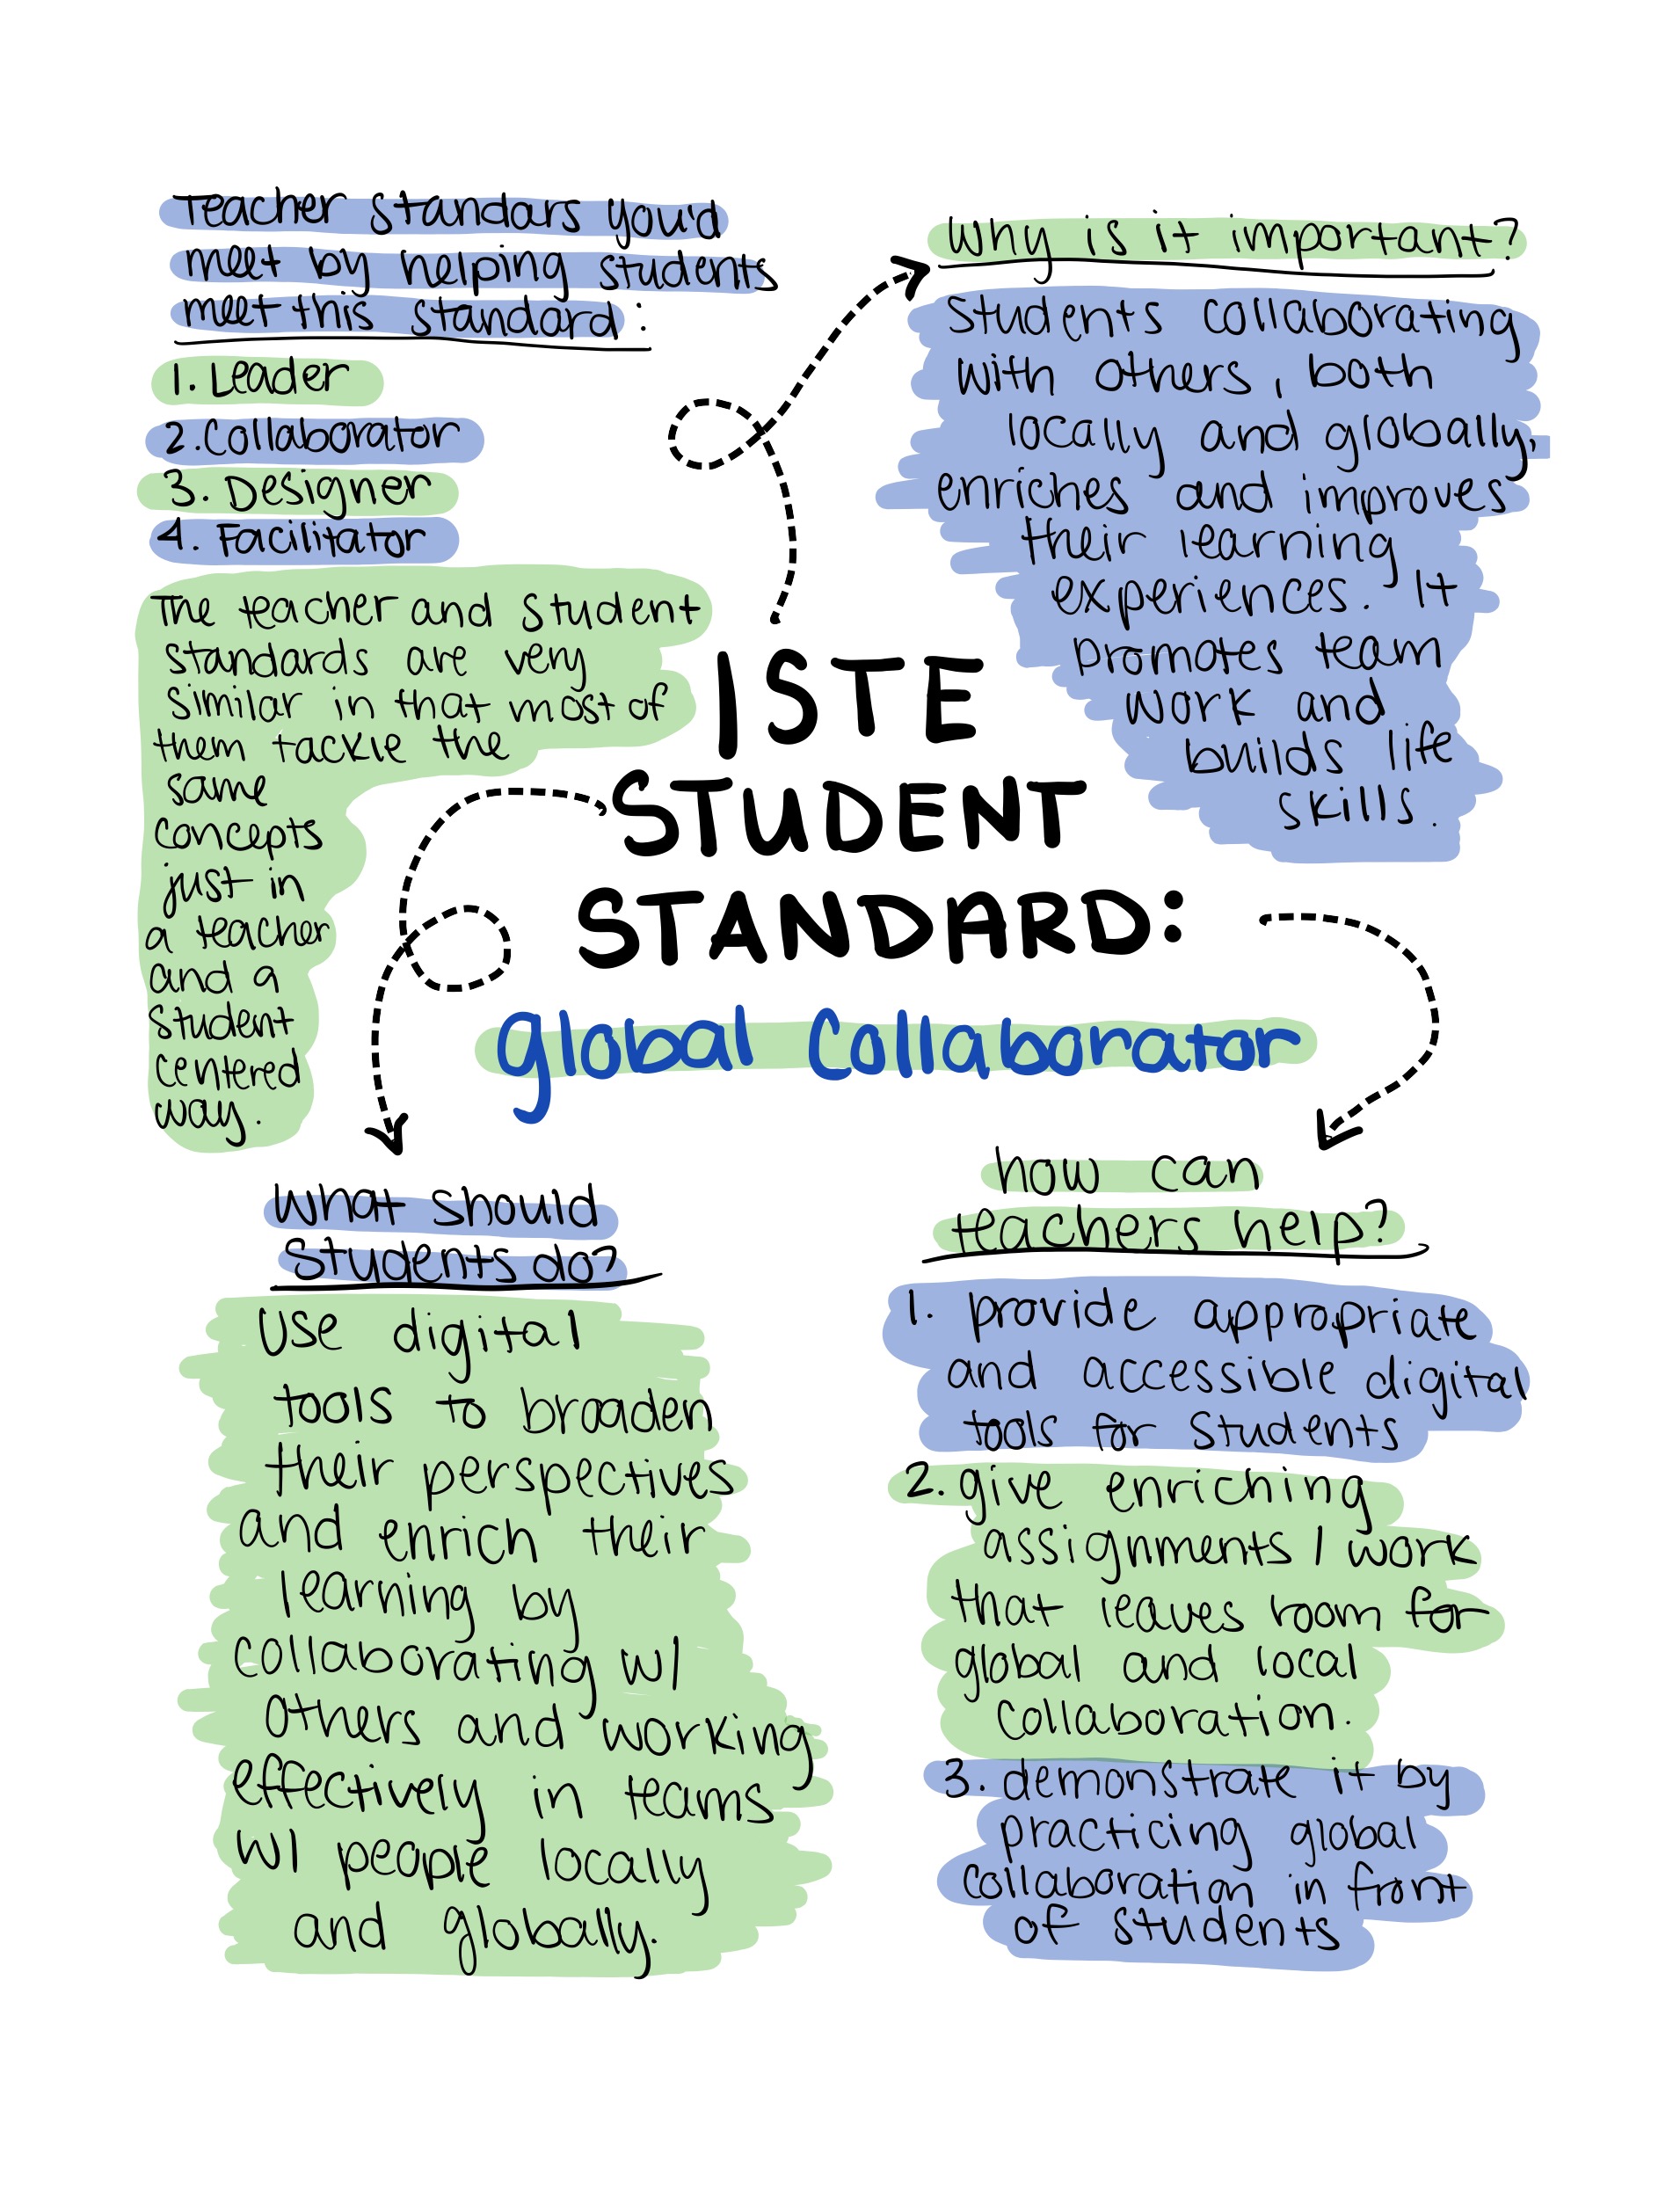 Sketchnote breaking down ISTE Standard for Students - Global Collaborator